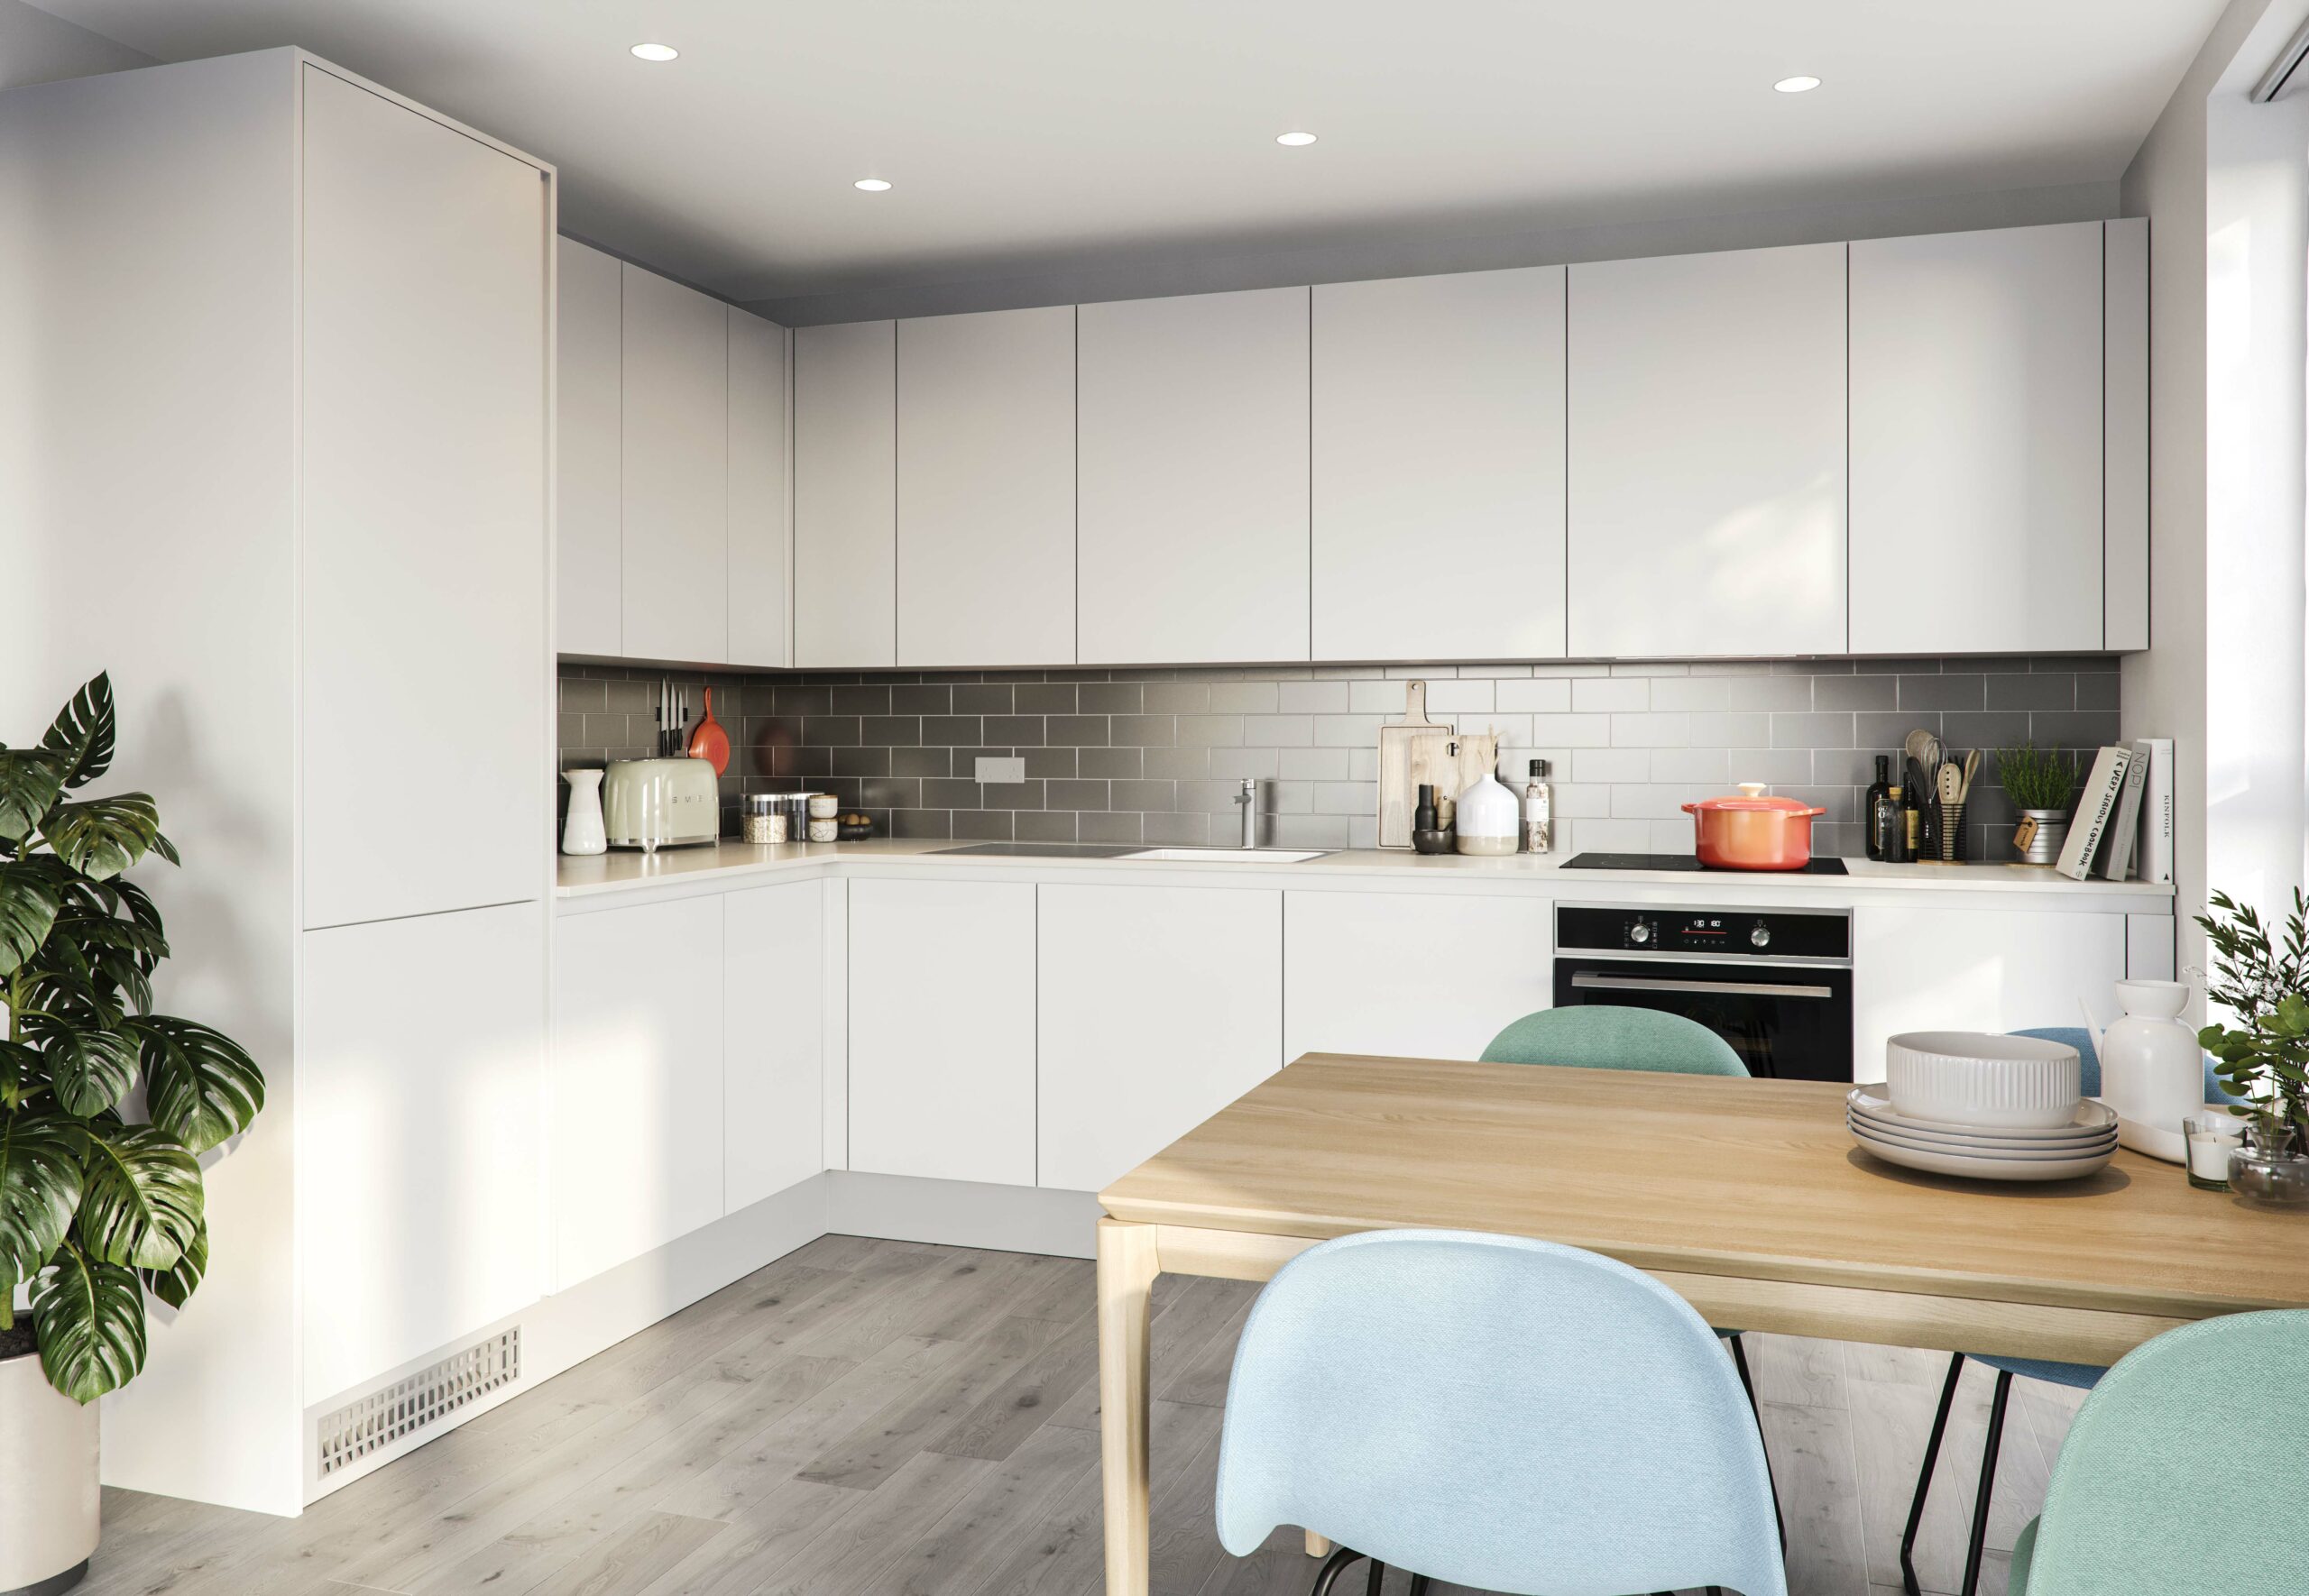 Image of West Acre Square by Southern Housing New Homes - Start your property journey on Share to Buy!